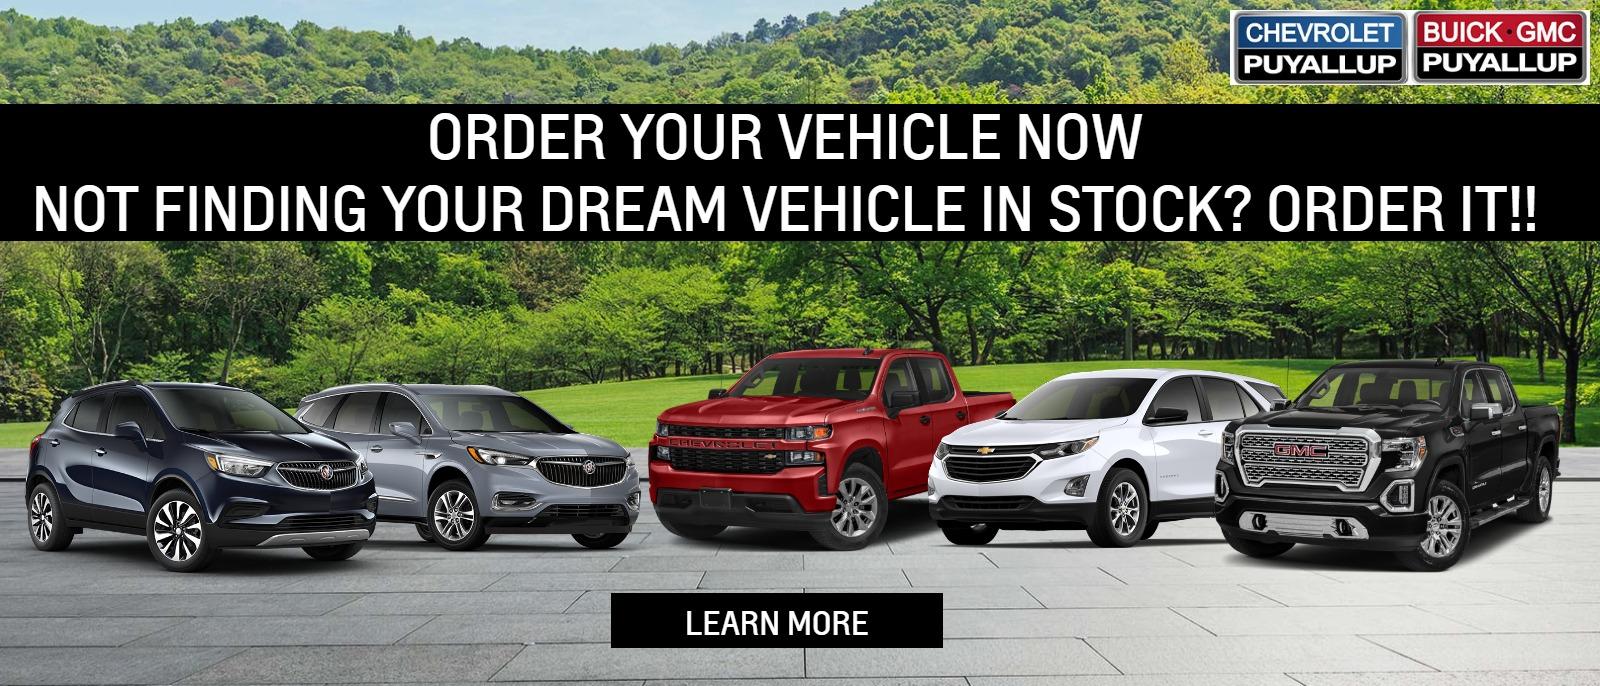 Order Your Vehicle NOW
Not finding your dream vehicle in stock? Order it!!